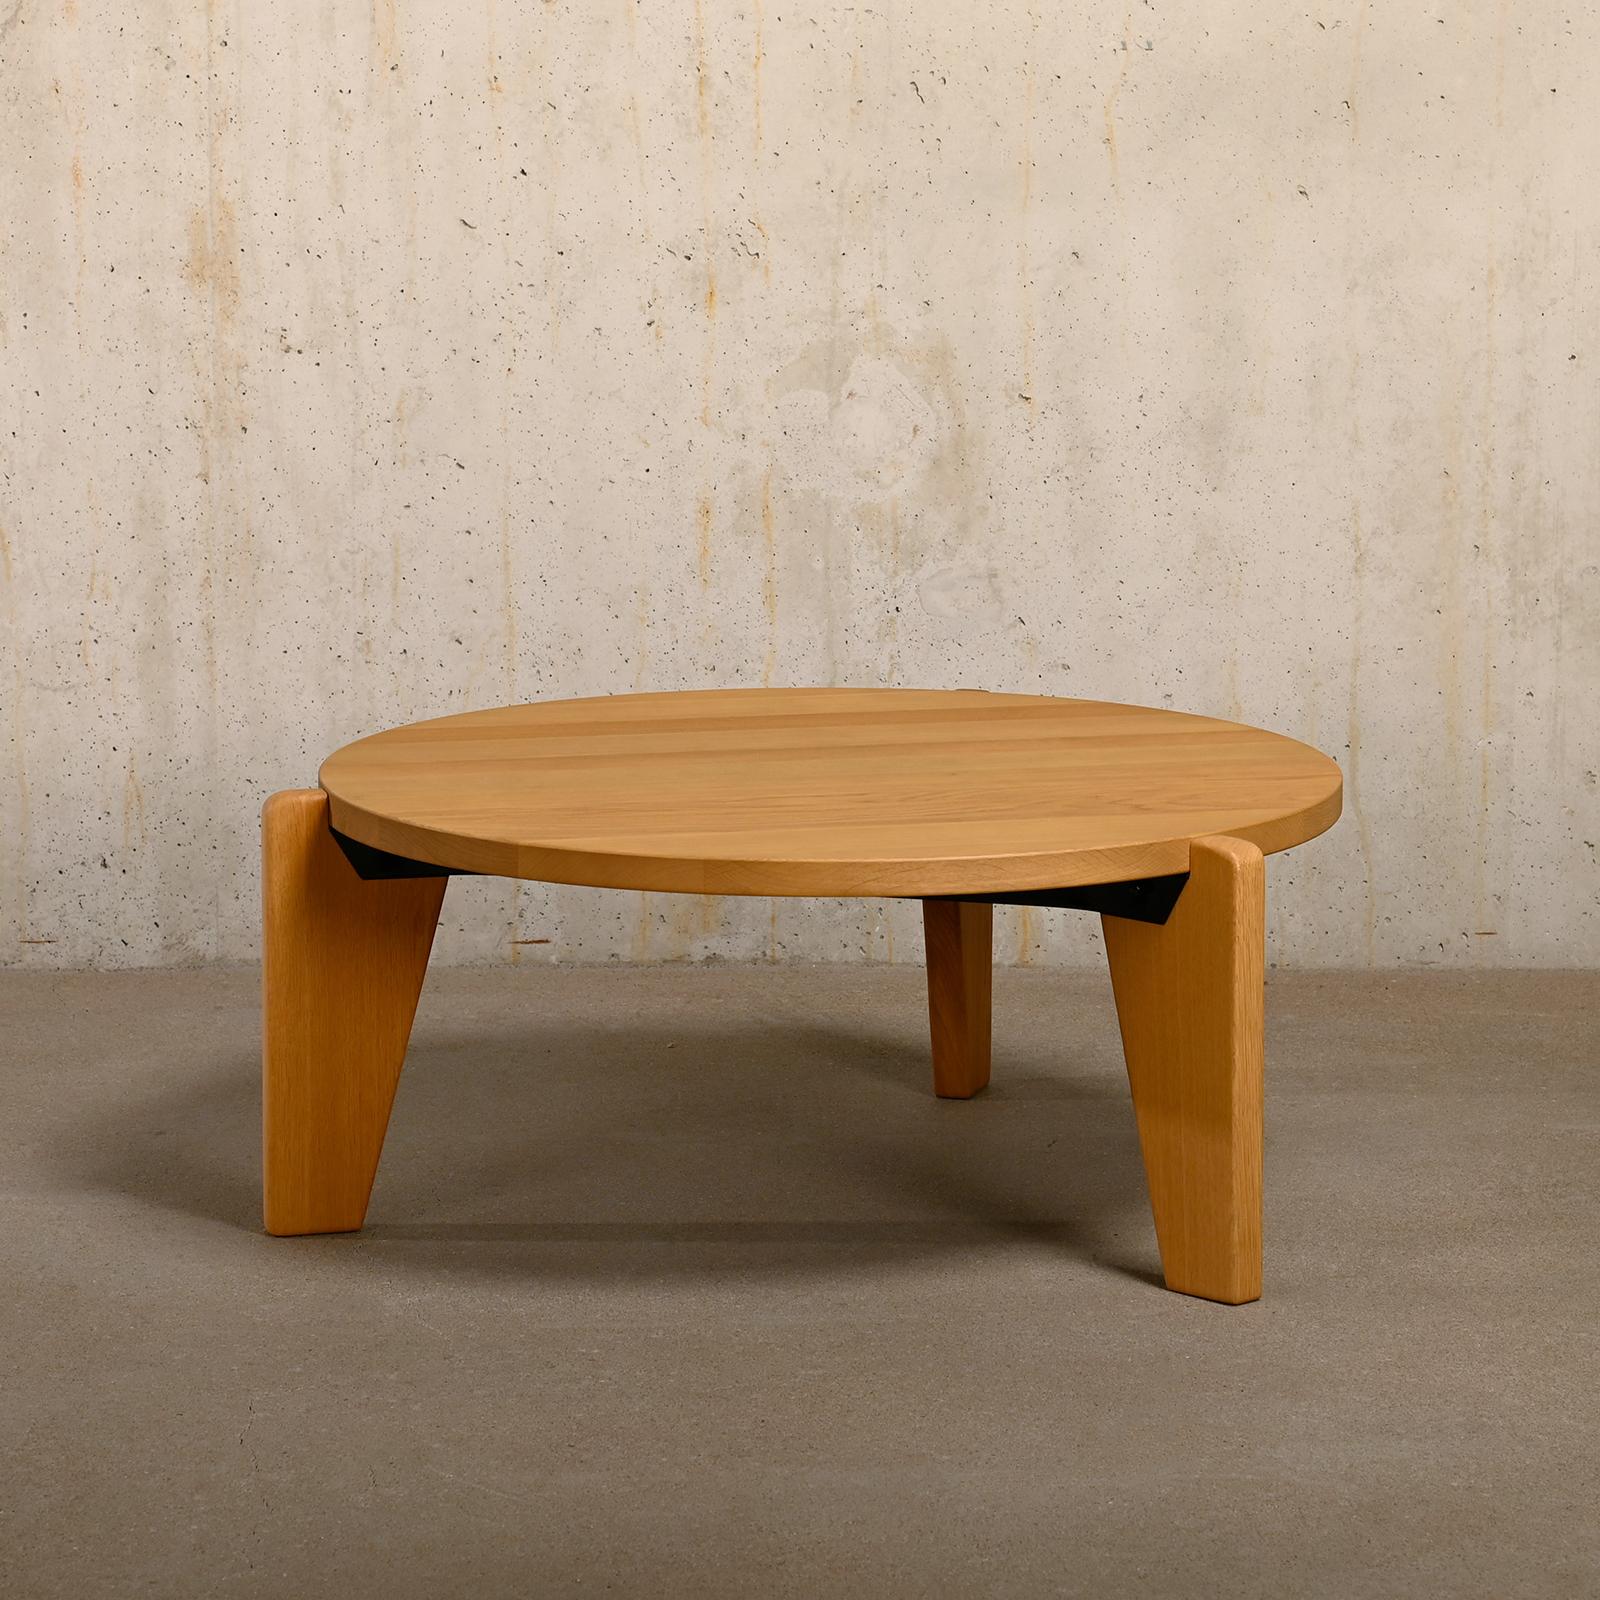 Solid Oak Coffee Table Guéridon Bas designed by Jean Prouvé in 1944 and manufactured by Vitra in 2022. Very good / excellent condition with minimal traces of use. The table has a good size and typical characteristics of a Prouvé design. Triangular